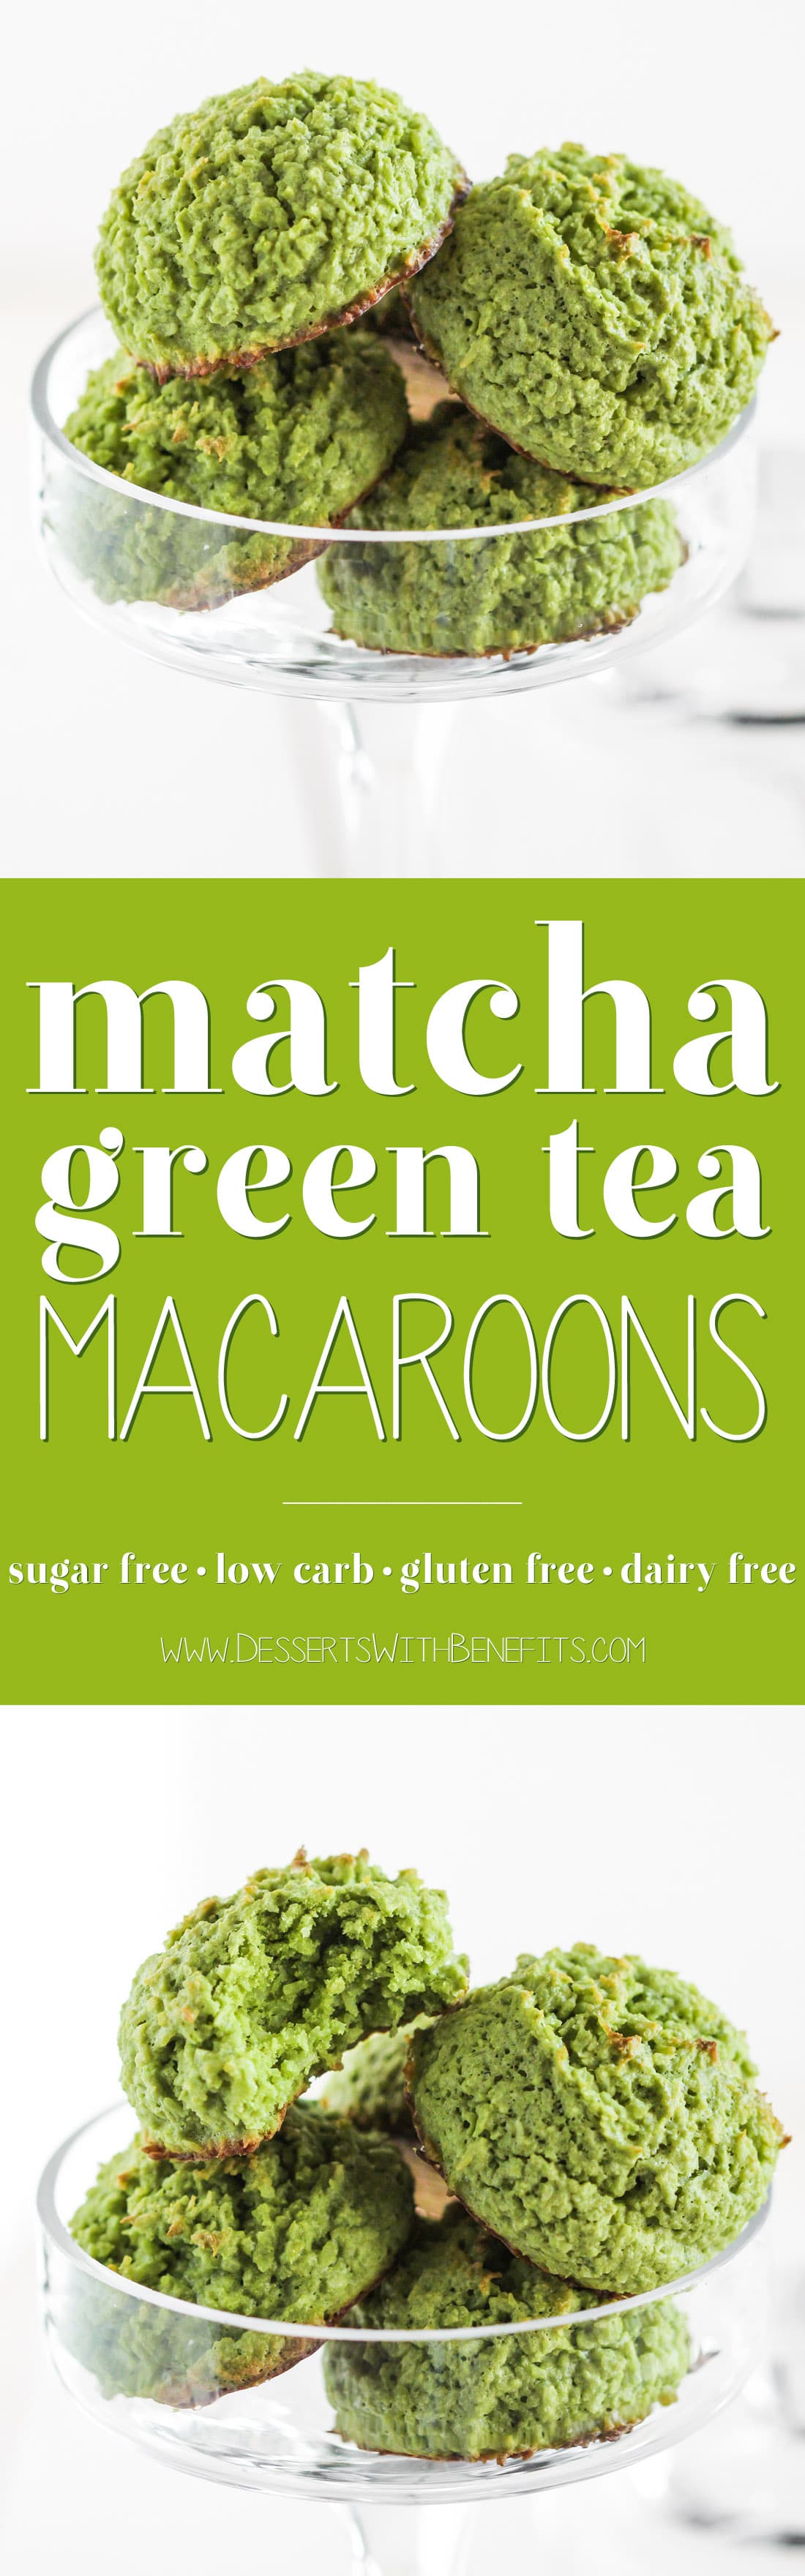 90-calorie Matcha Green Tea Coconut Macaroons – heaven in a bite-sized package! They’re chewy from the coconut, have a deep, sophisticated matcha flavor, and are perfectly sweet. You’d never know these Matcha Macaroons are sugar free, low carb, gluten free, AND dairy free! Healthy Dessert Recipes at the Desserts With Benefits Blog (www.DessertsWithBenefits.com)